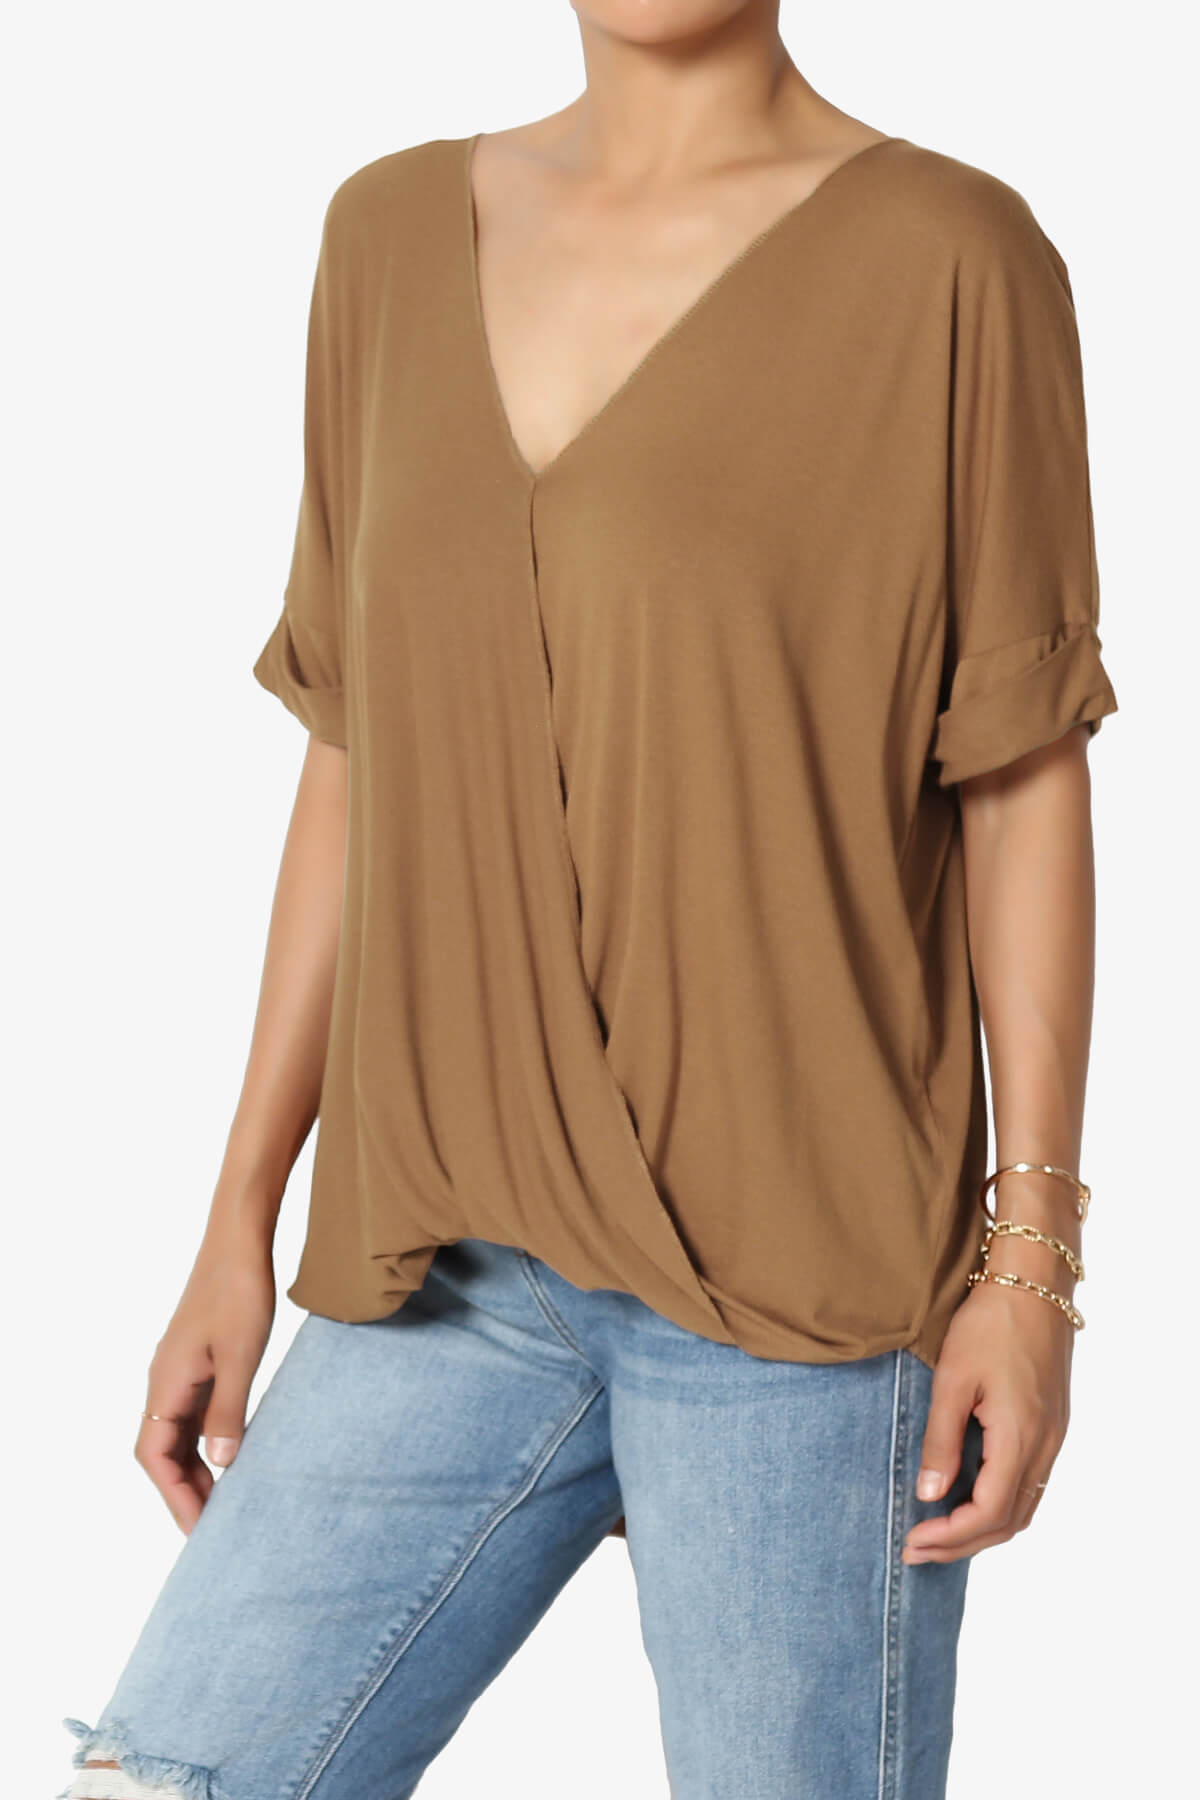 Load image into Gallery viewer, Tackle Wrap Hi-Low Crepe Knit Top DEEP CAMEL_3
